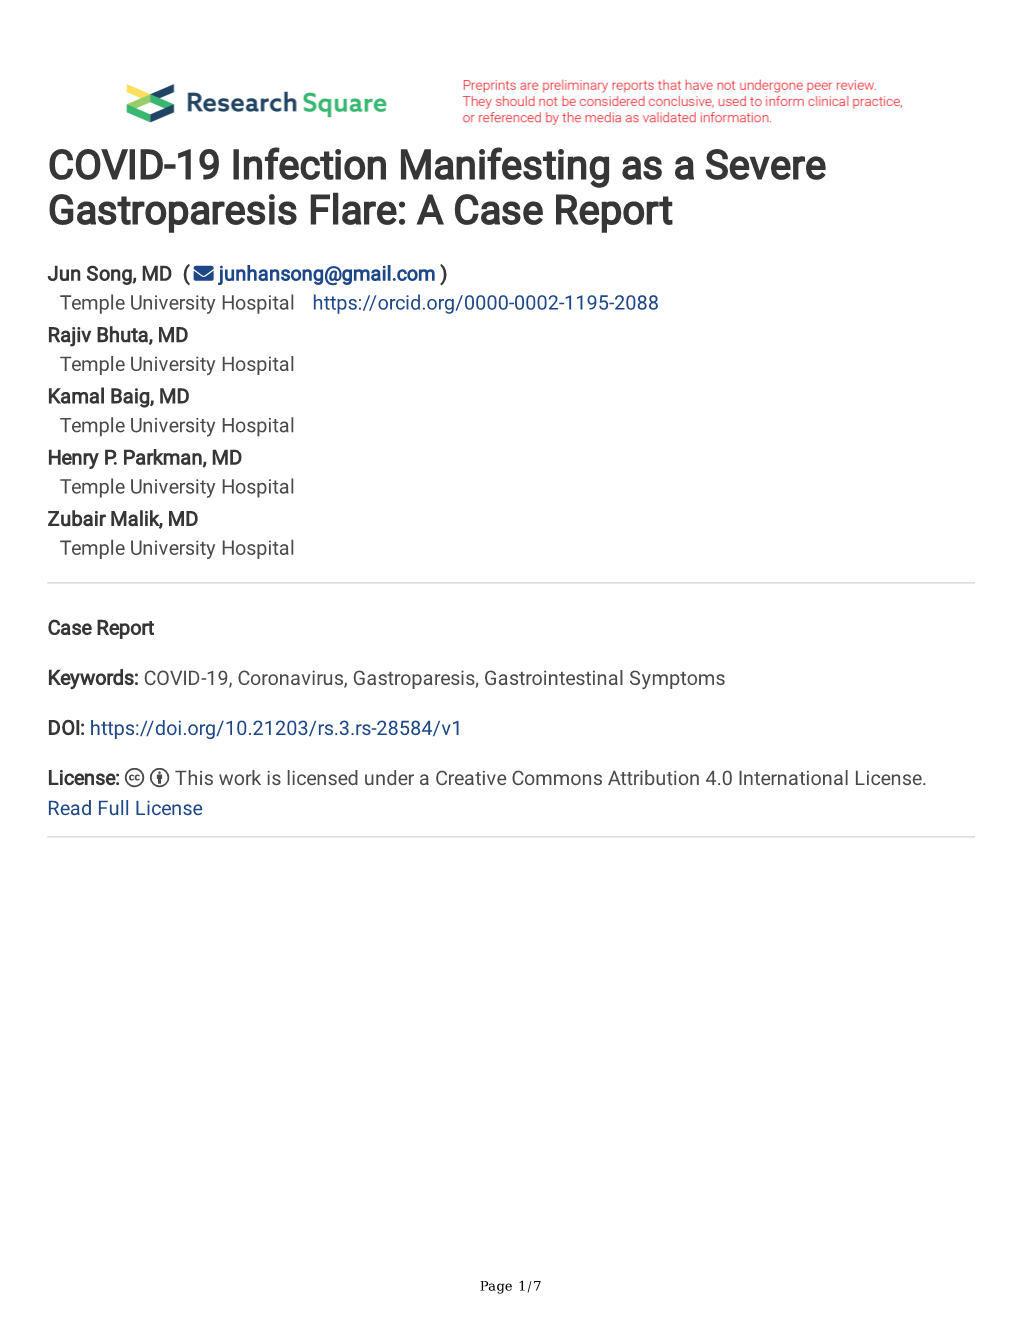 COVID-19 Infection Manifesting As a Severe Gastroparesis Flare: a Case Report